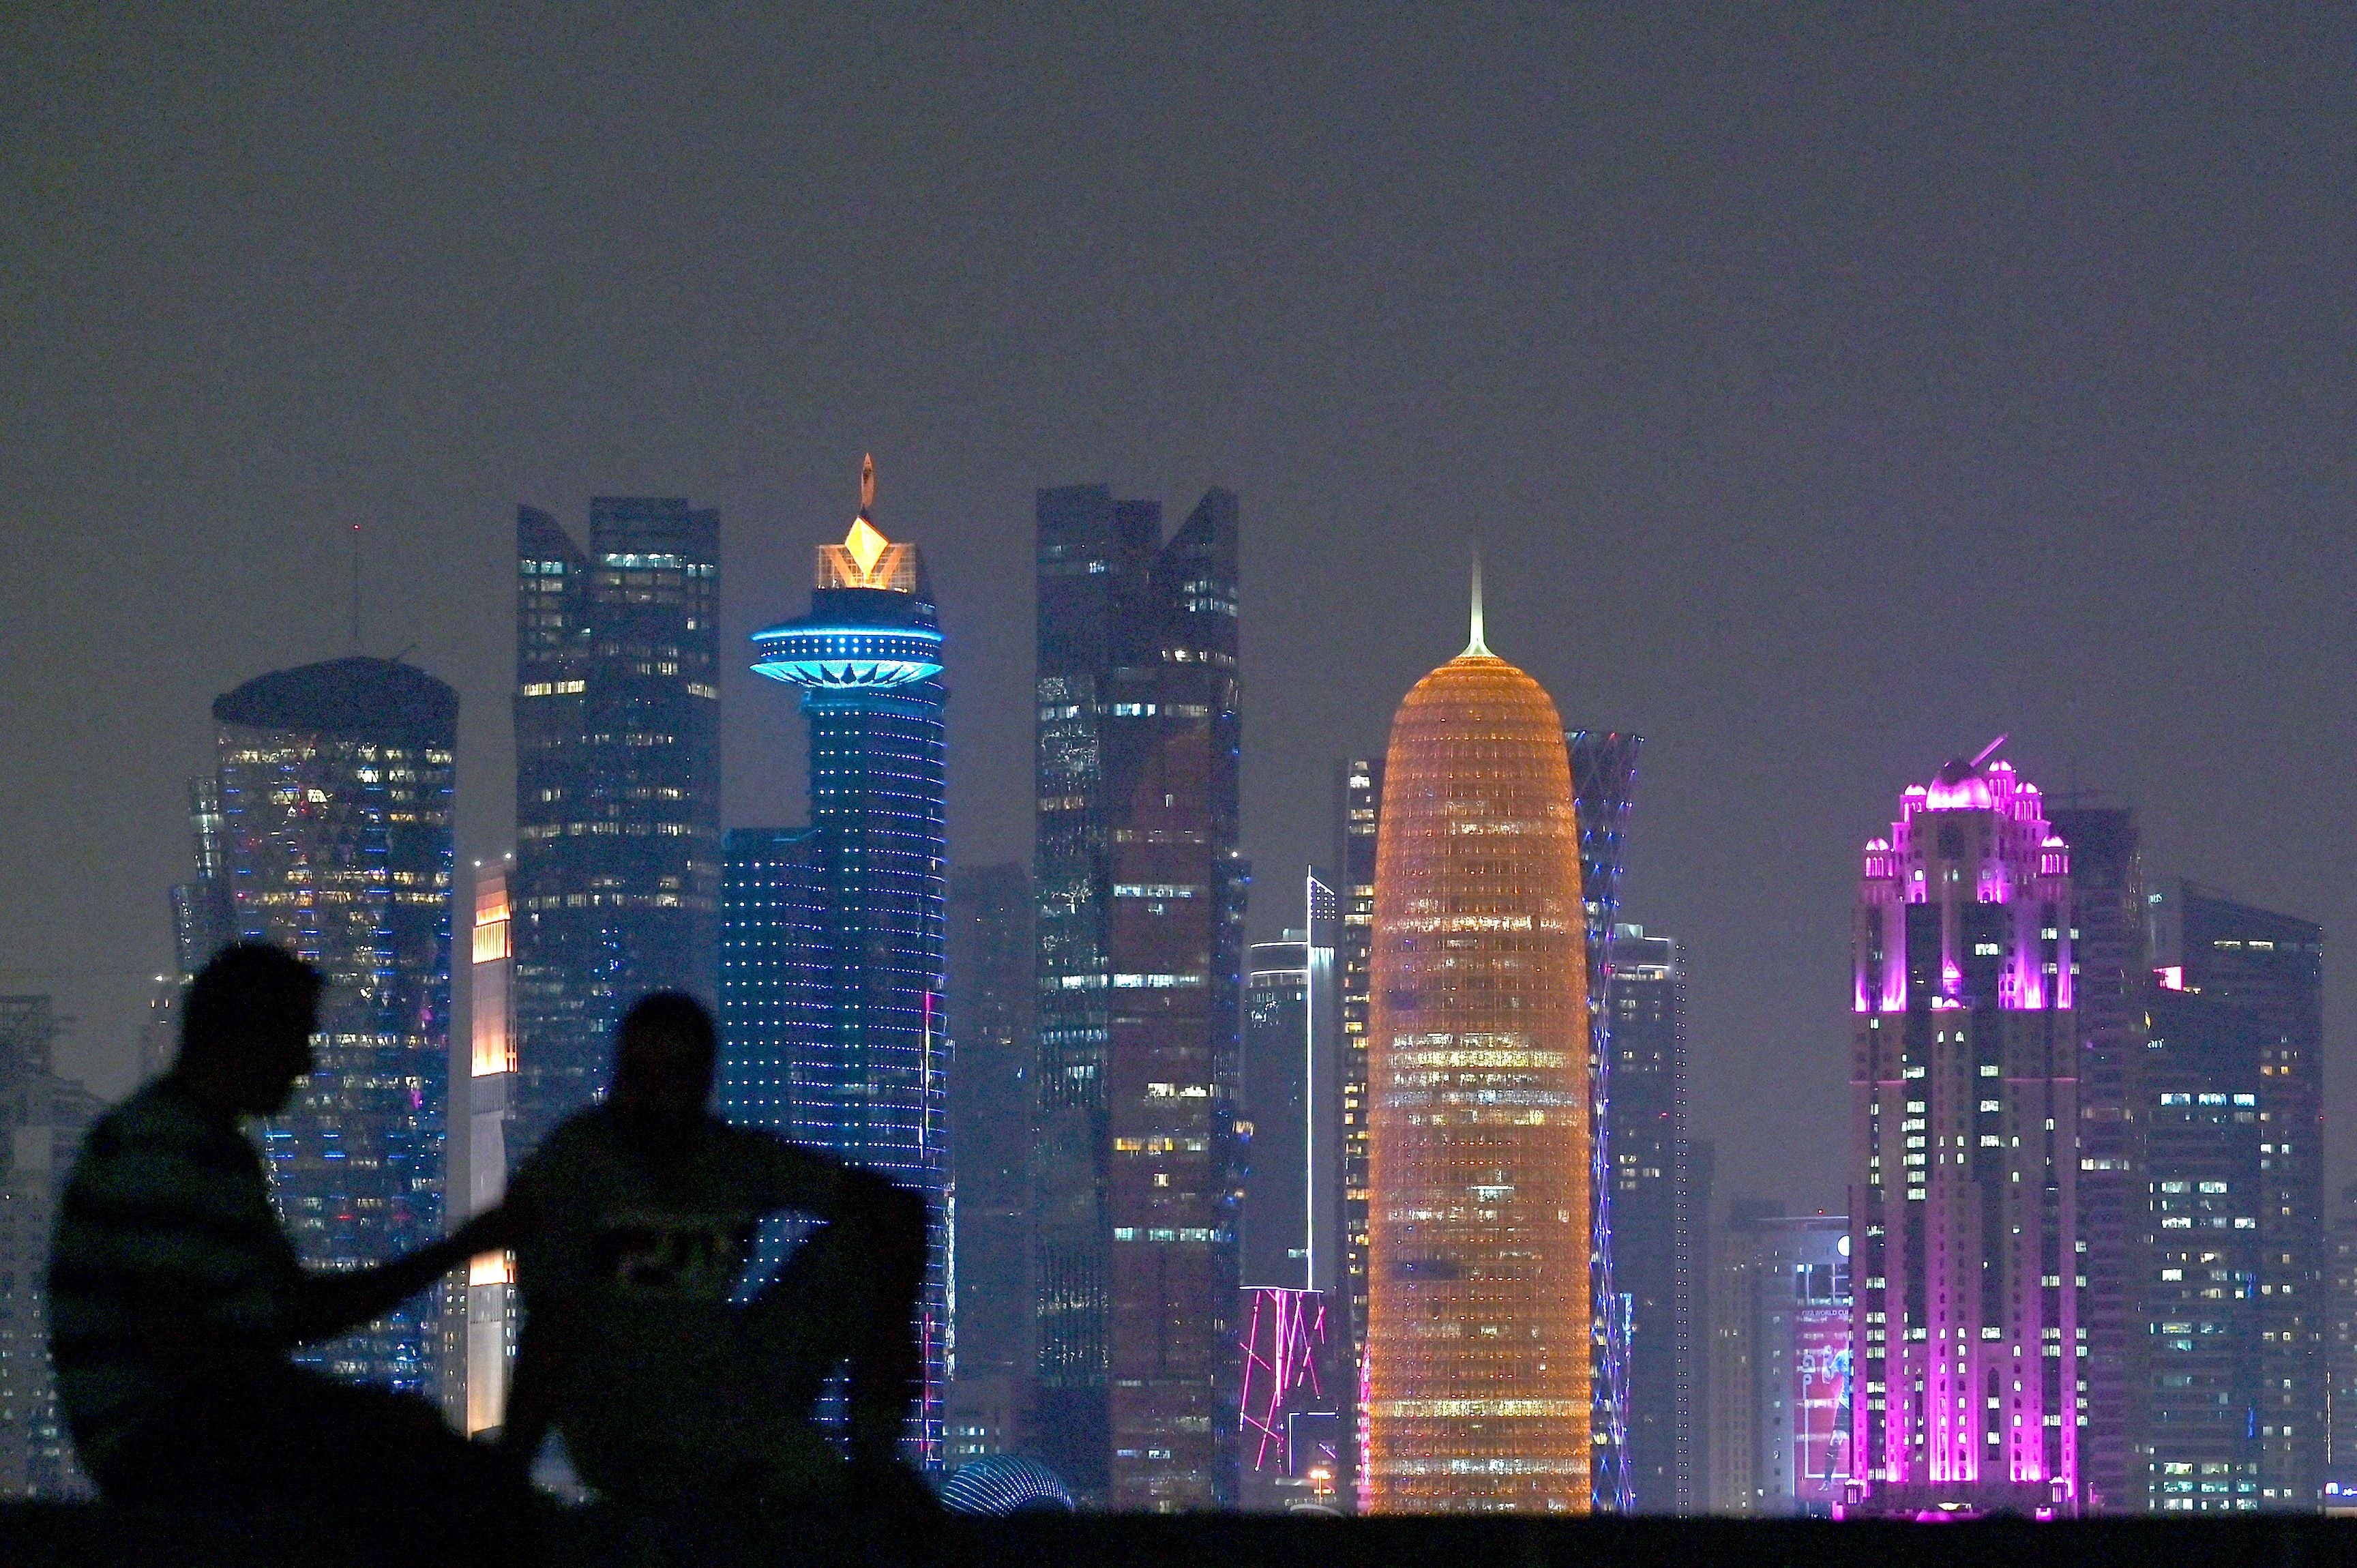 The city skyline of Doha in Qatar. (Photo: GABRIEL BOUYS/AFP, Getty Images)